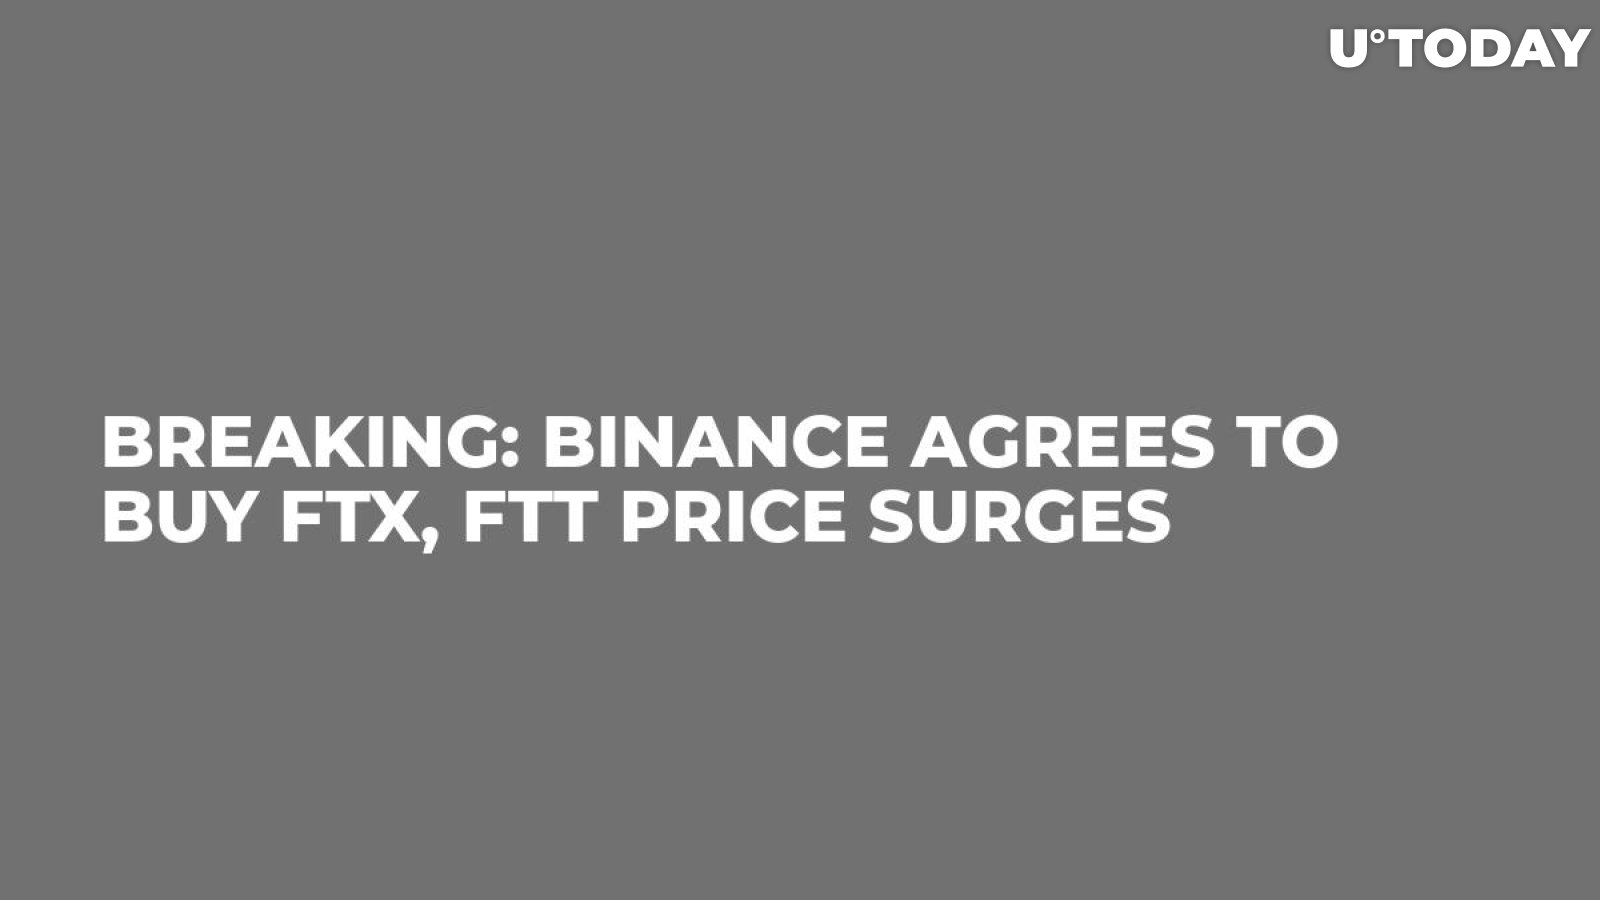 Breaking: Binance Agrees to Buy FTX, FTT Price Surges